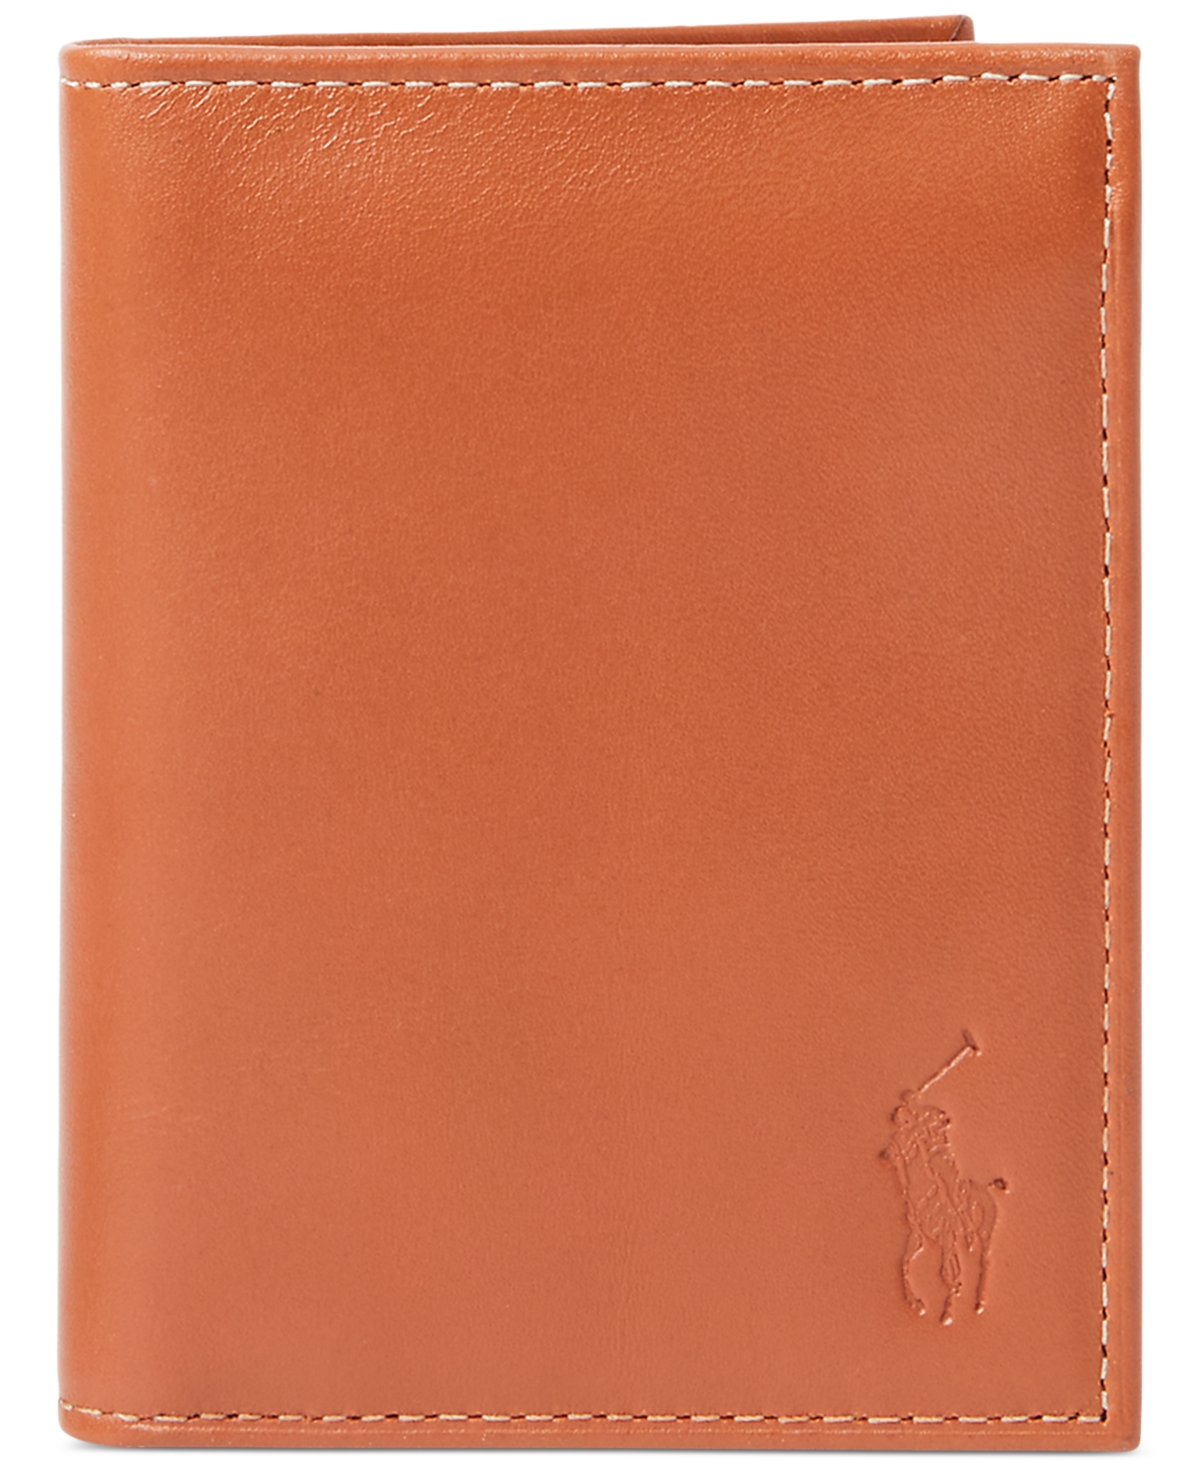 Polo Ralph Lauren Burnished Leather Billfold In Brown